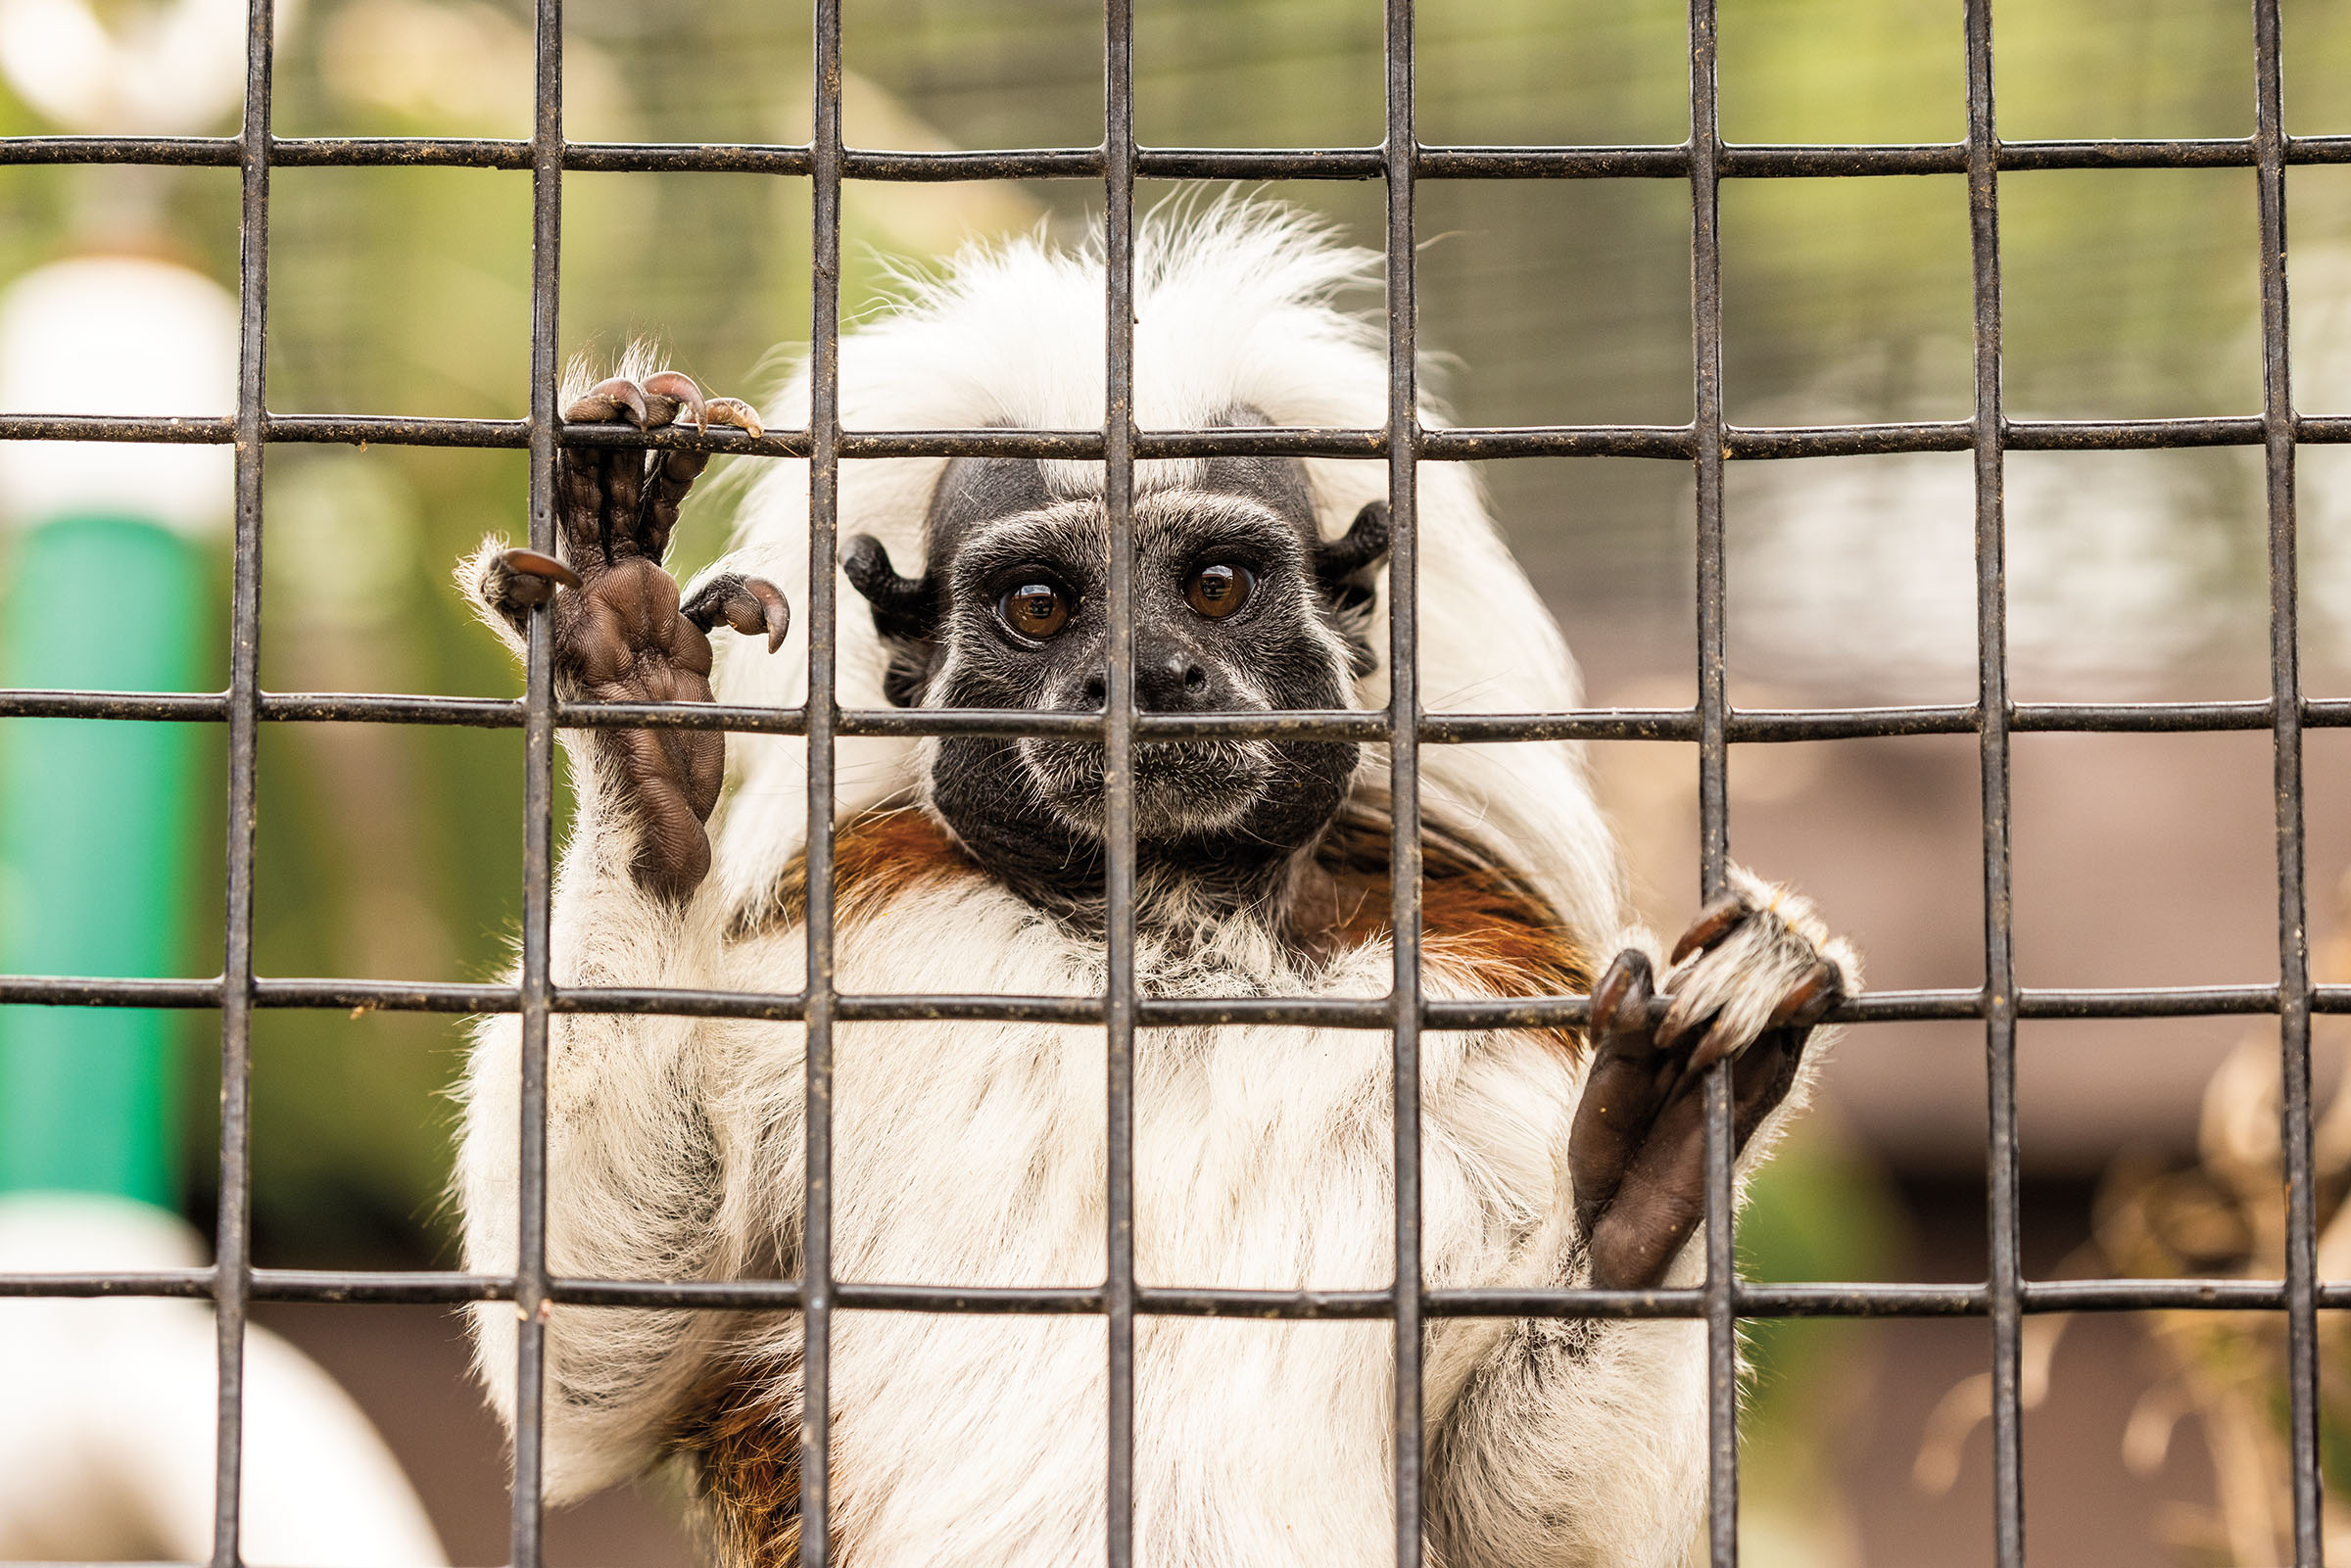 An animal with long, white fur places its claws on the black bars of a cage looking directly into the camera